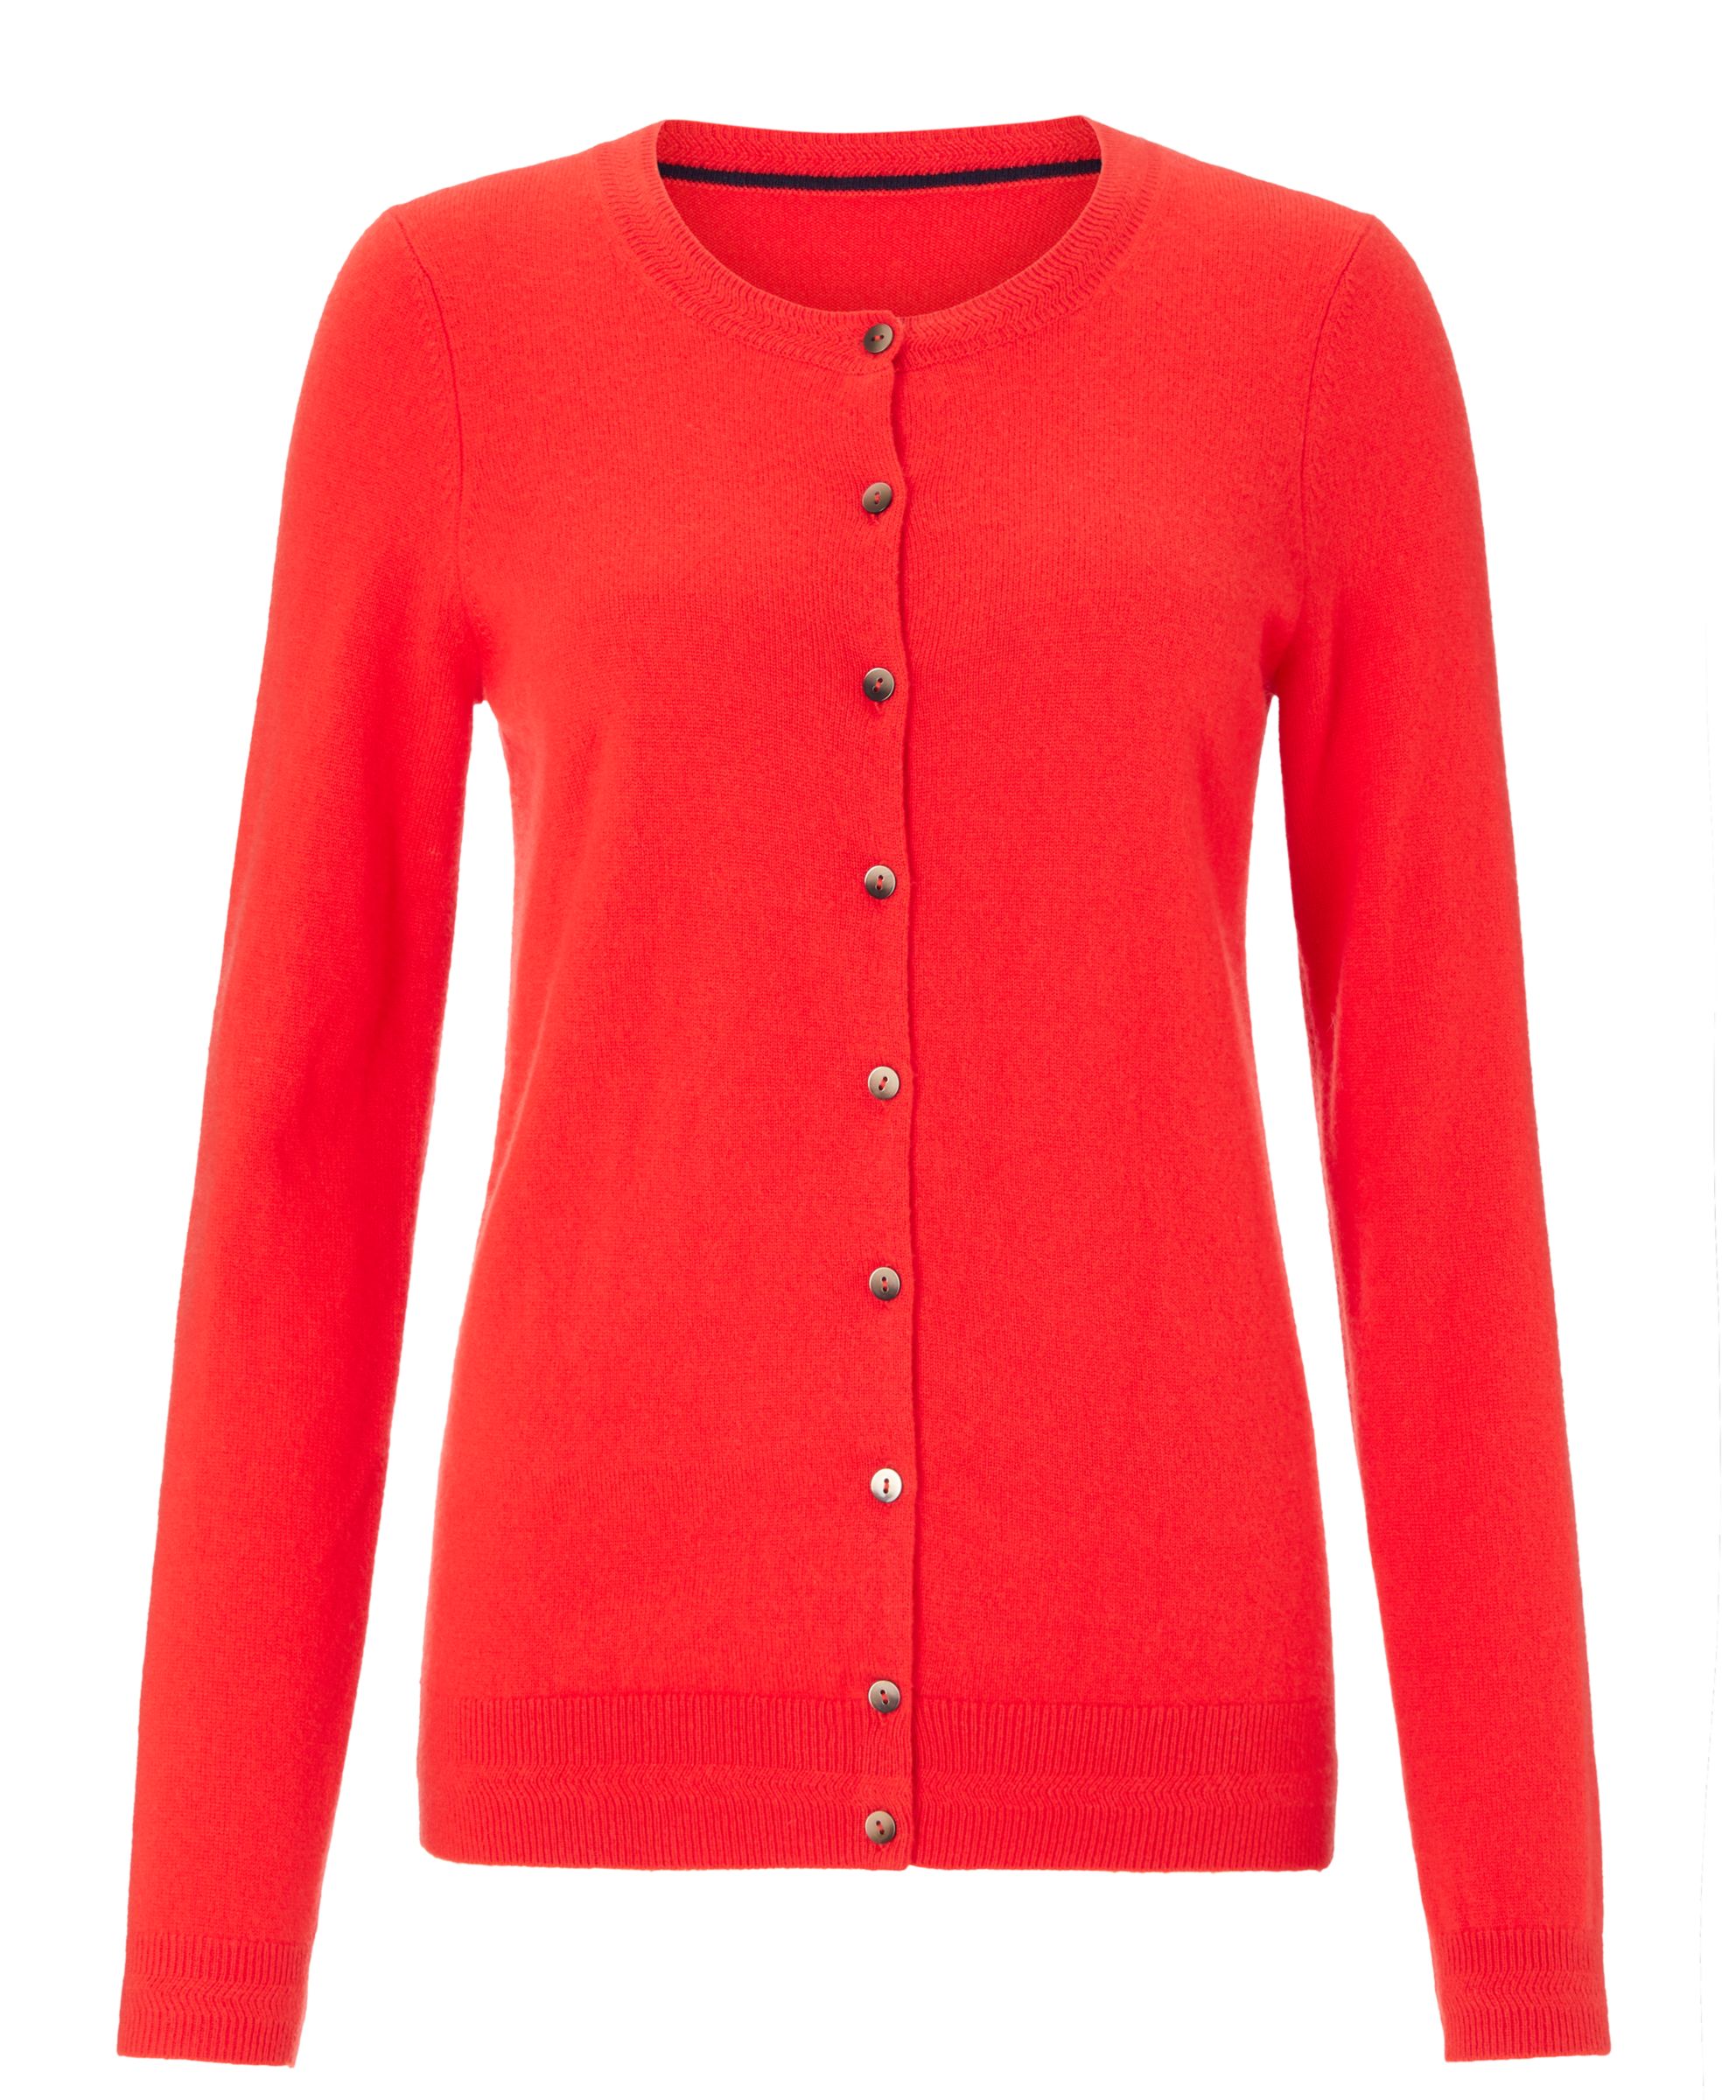 Boden Cashmere Crew Cardigan, Pop Red at John Lewis & Partners